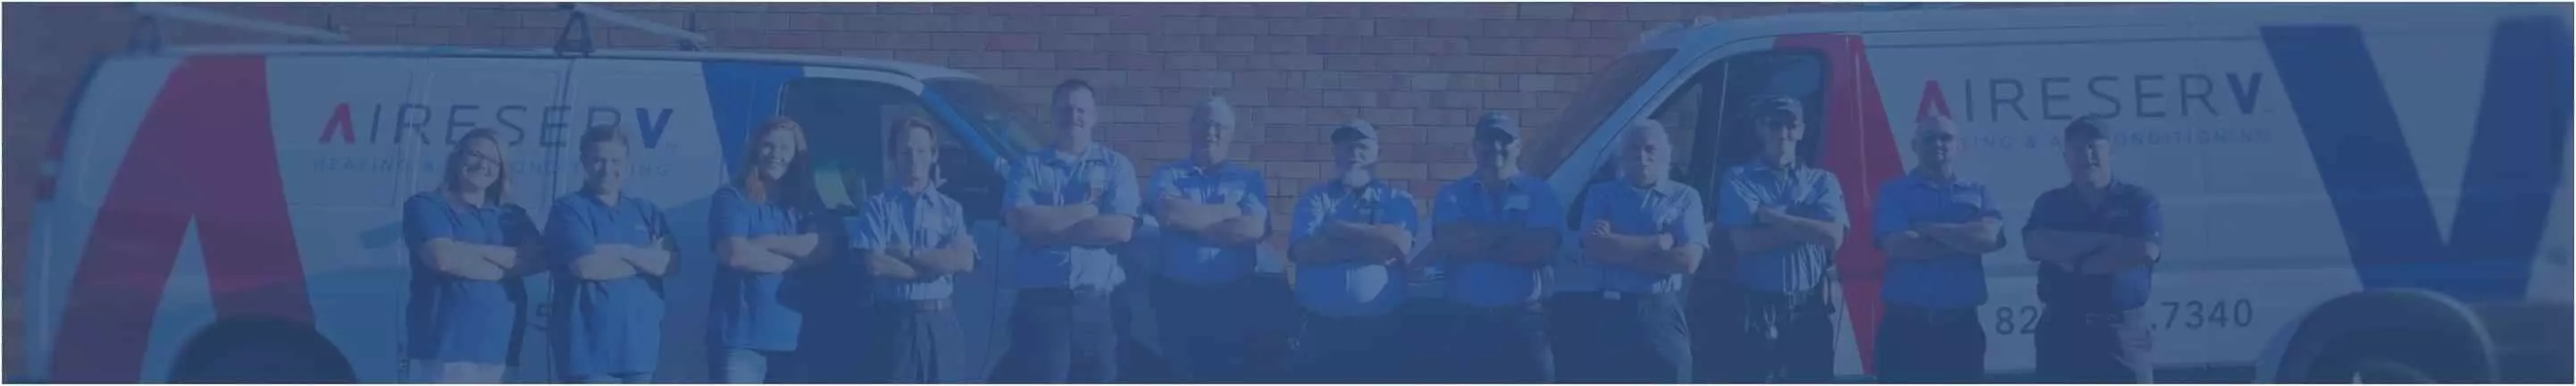 Row of Aire Serv technicians with their arms crossed standing in front of an Aire Serv work van and brick wall. 